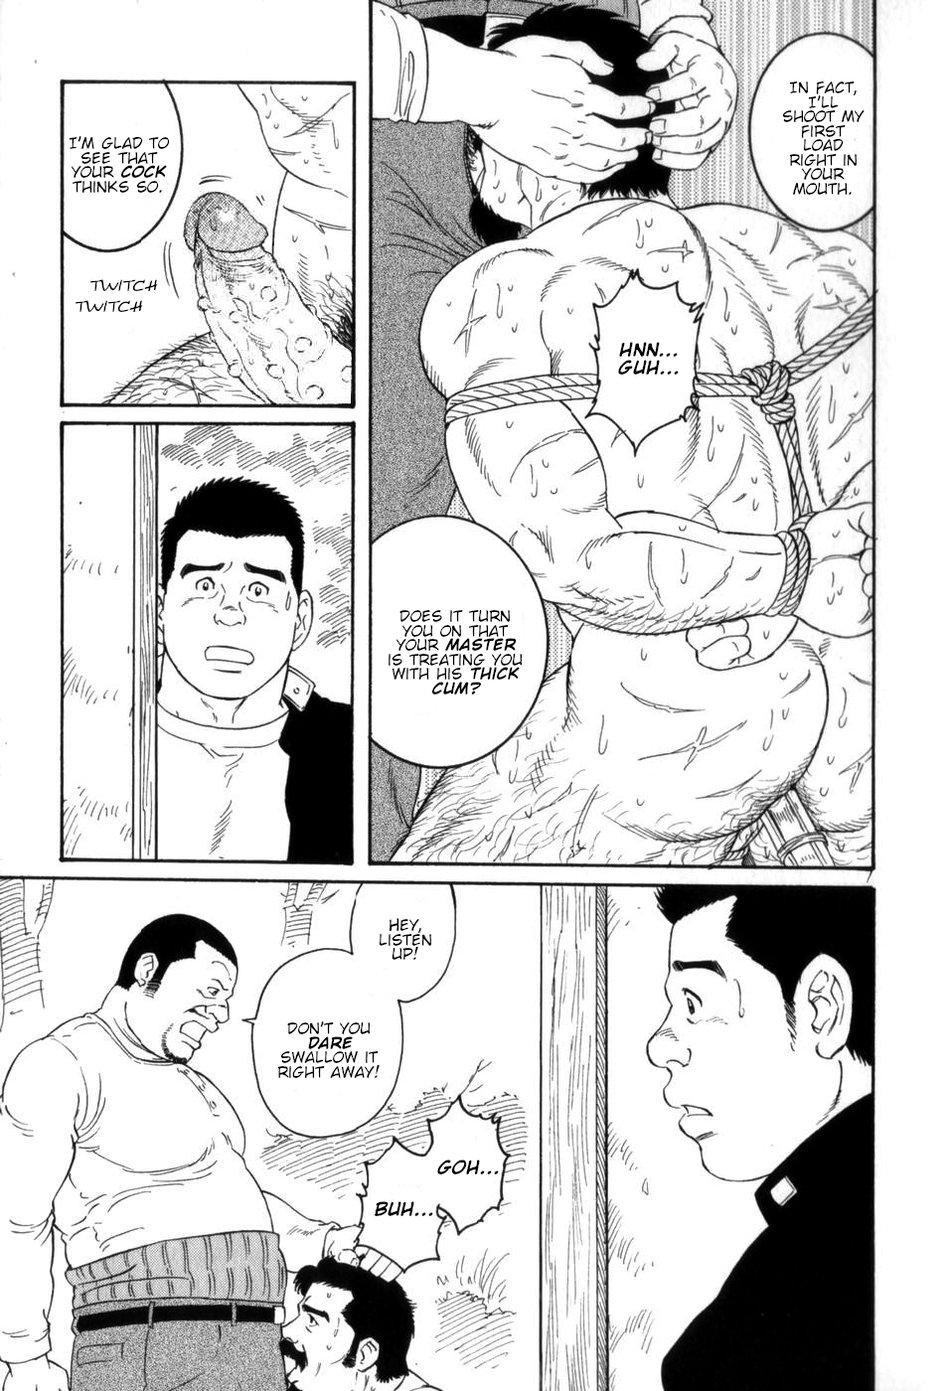 Bus Gedou no Ie Gekan | House of Brutes Vol. 3 Ch. 4 Celebrity Sex - Page 5